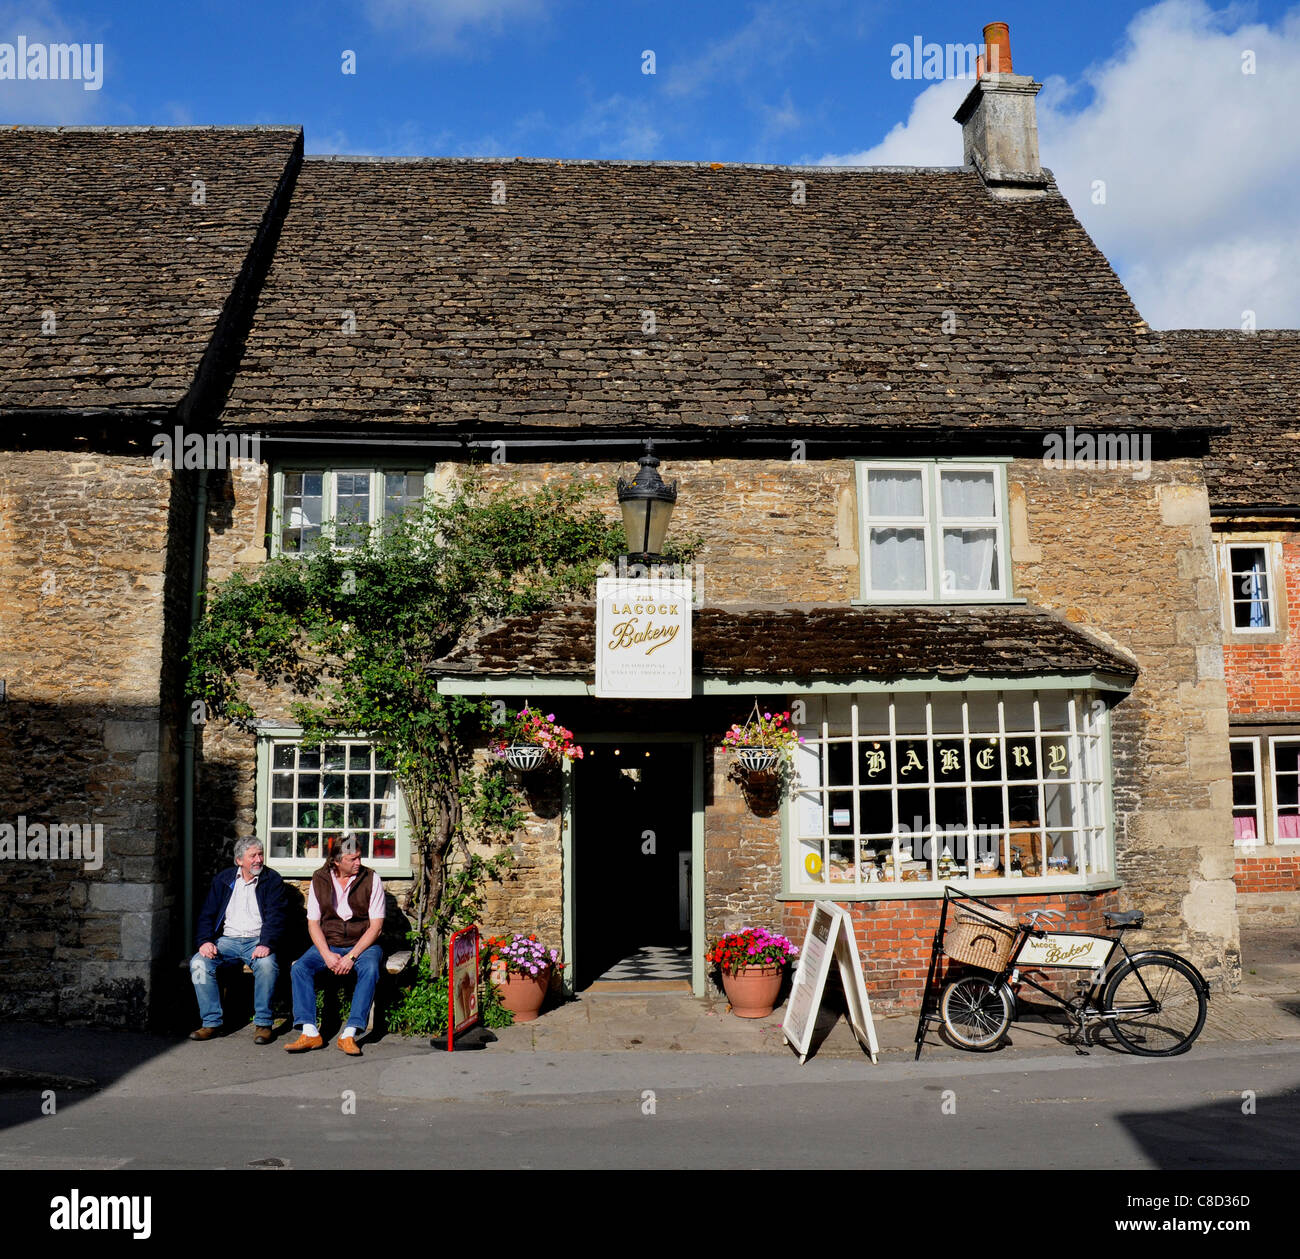 THE BAKERY IN THE PICURESQUE VILLAGE OF LACOCK, WILTSHIRE Stock Photo